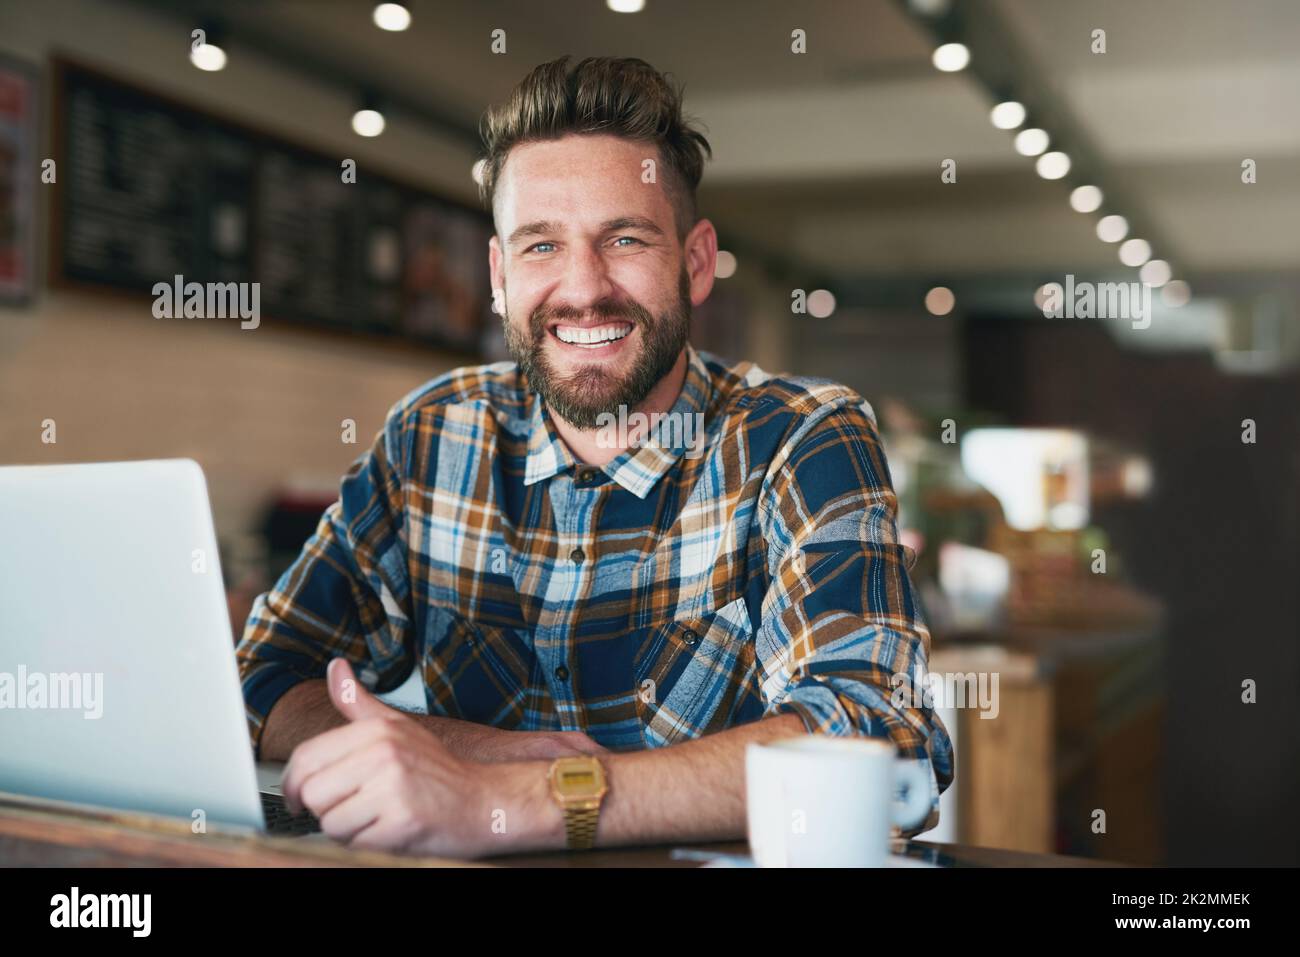 I like my internet connection as strong as my coffee. Portrait of a young man using his laptop while sitting by the window in a cafe. Stock Photo